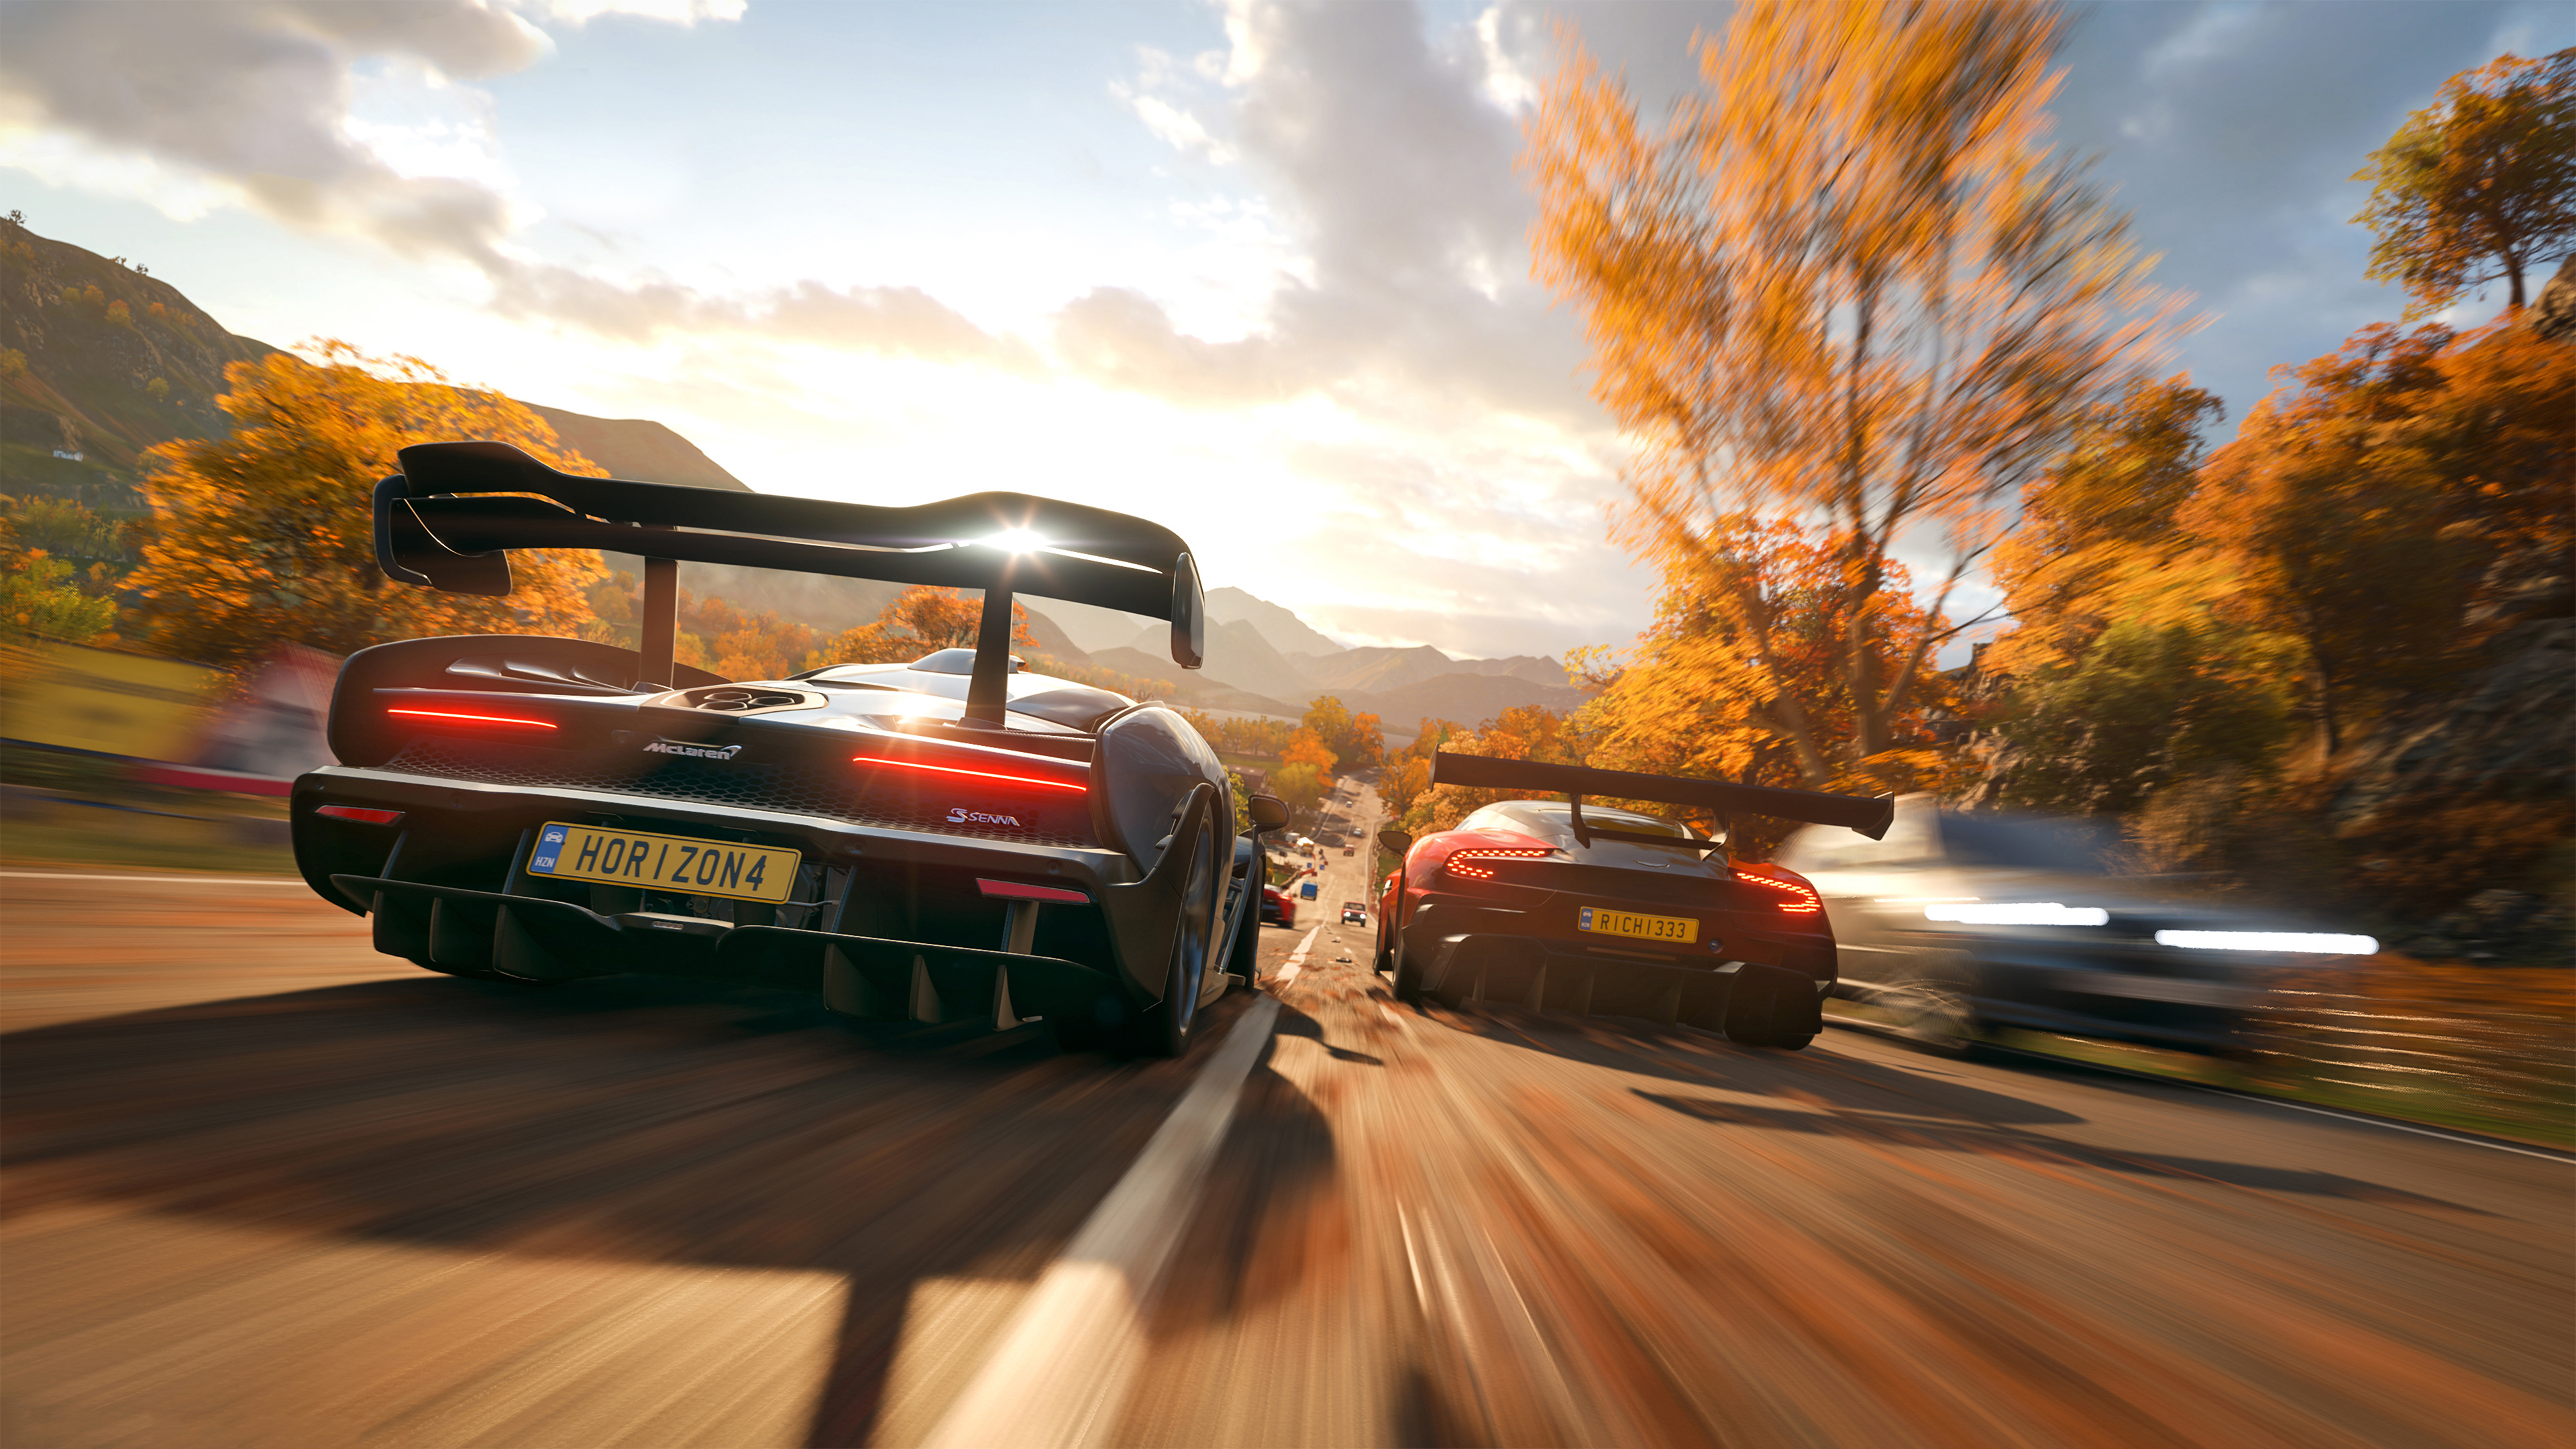 Wallpapers Forza Horizon 4 the 2018 Games games on the desktop